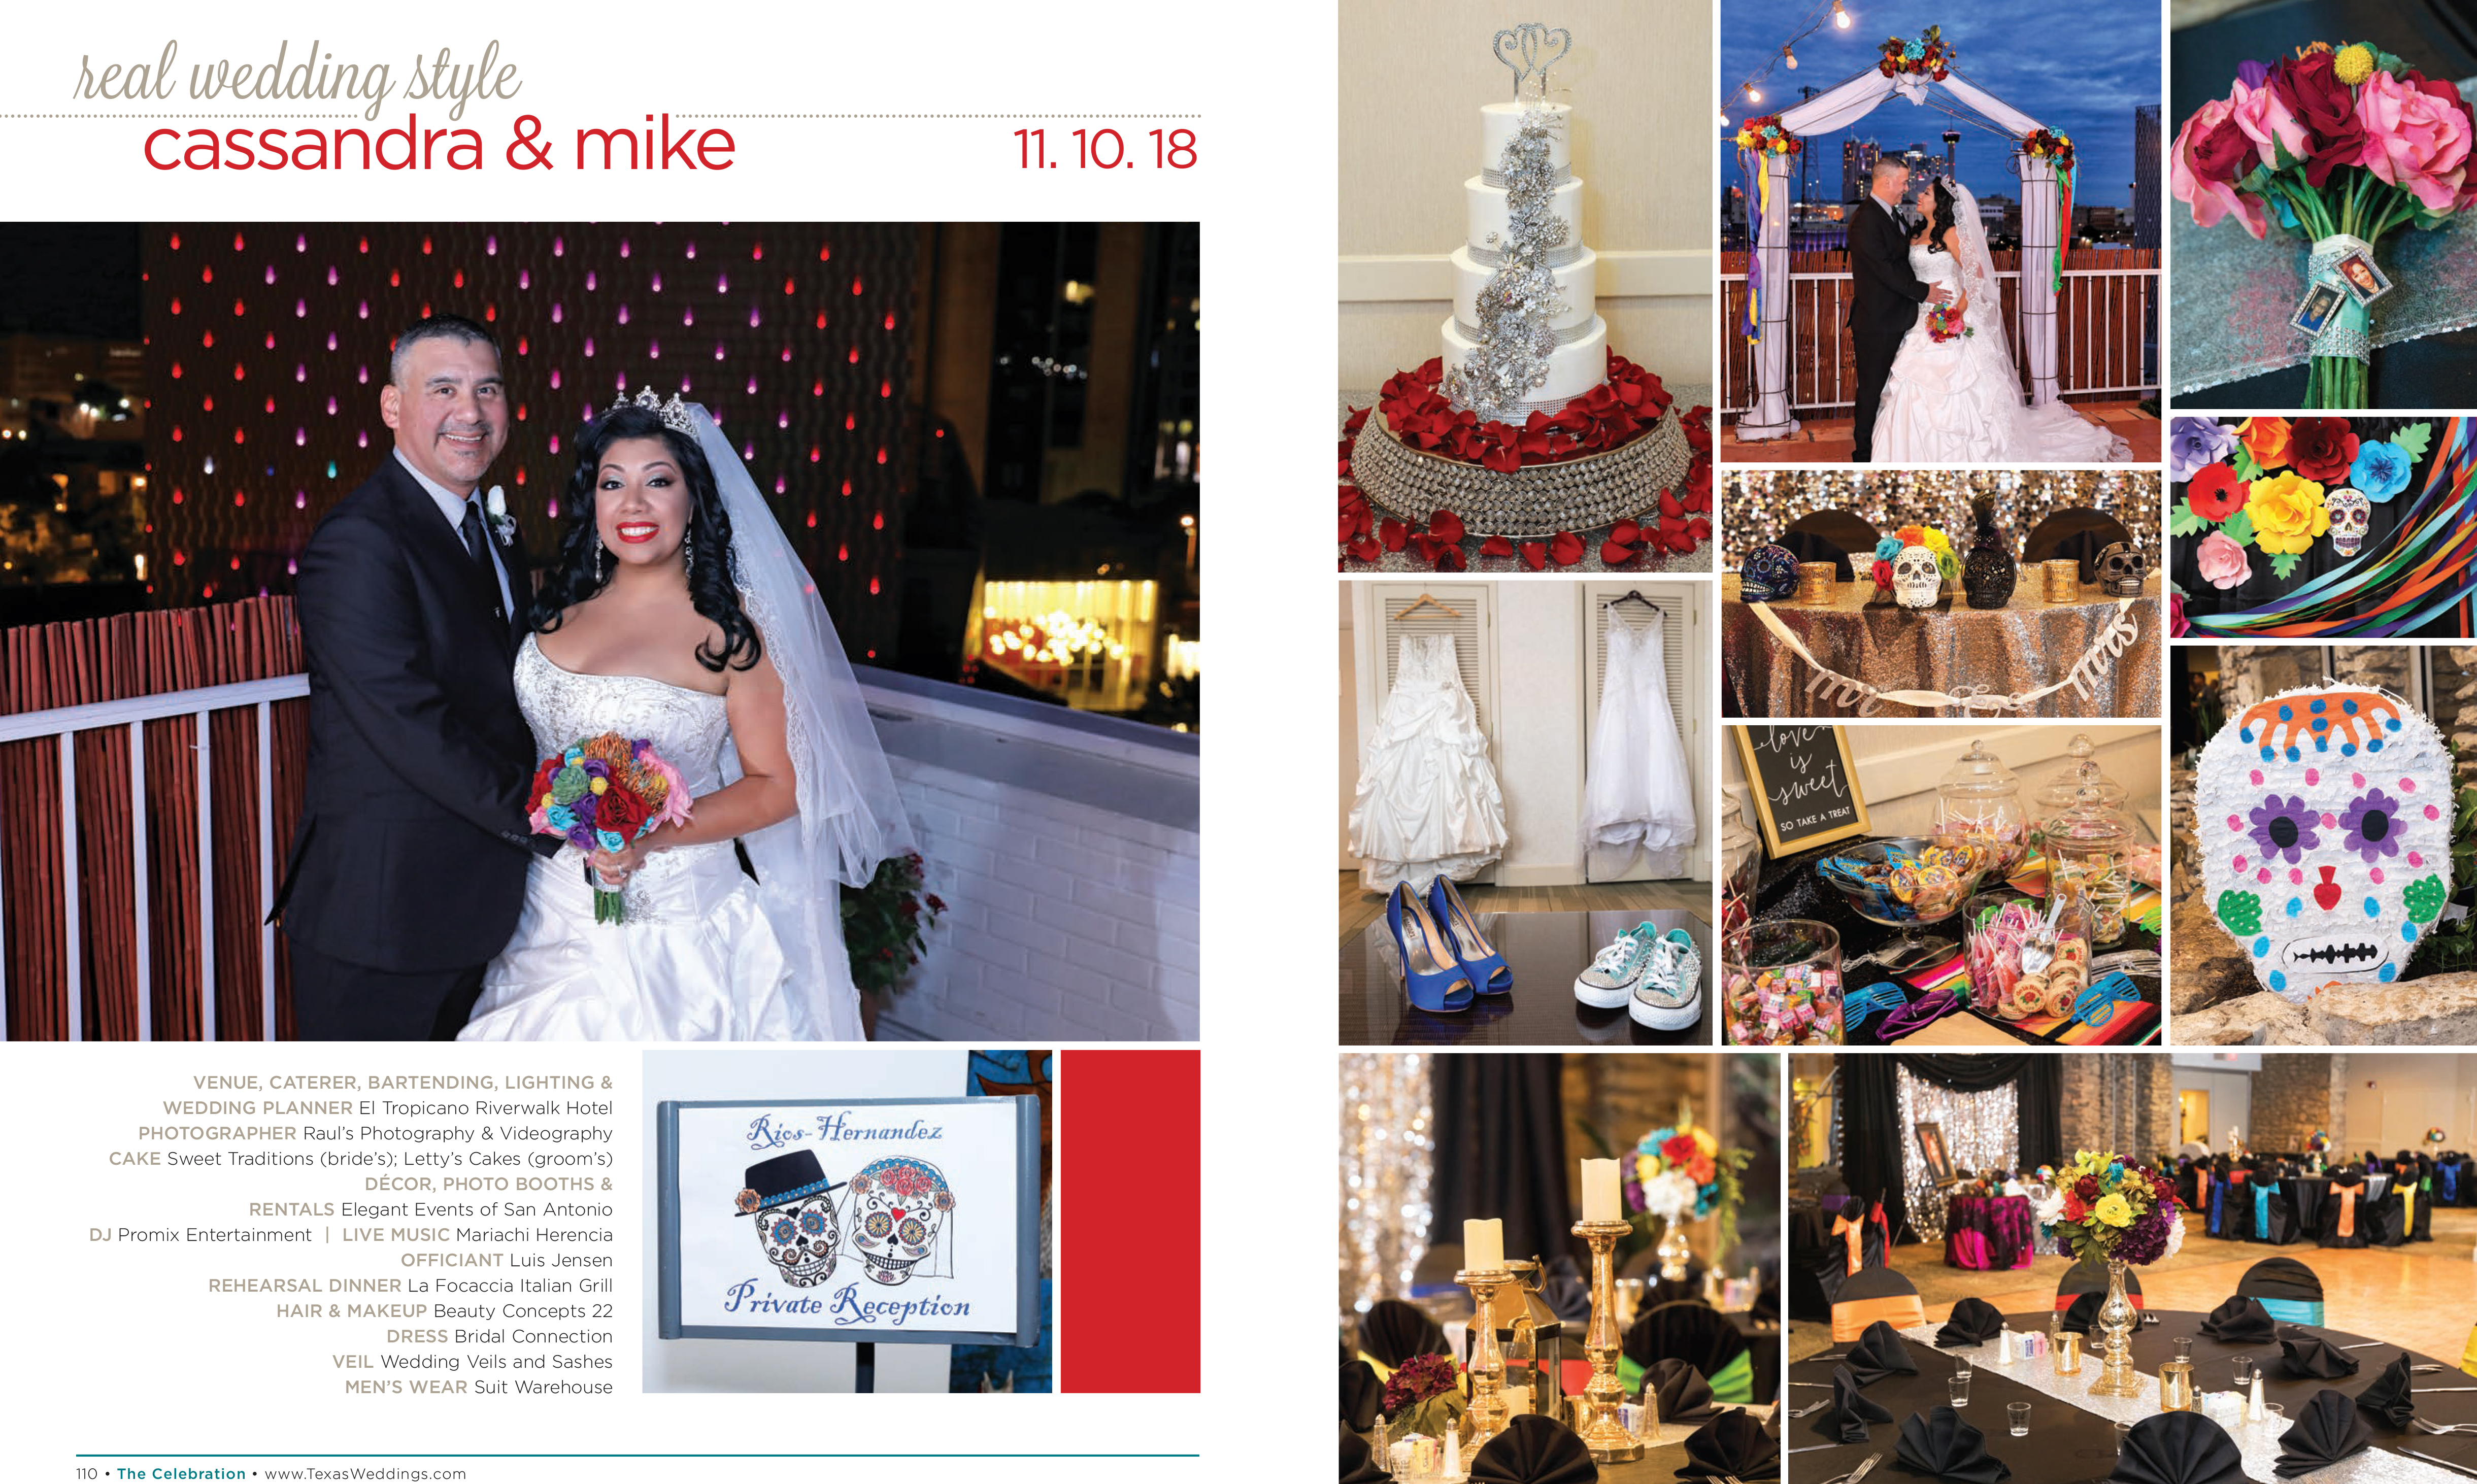 Cassandra & Mike in their Real Wedding Page in the Spring/Summer 2019 Texas Wedding Guide